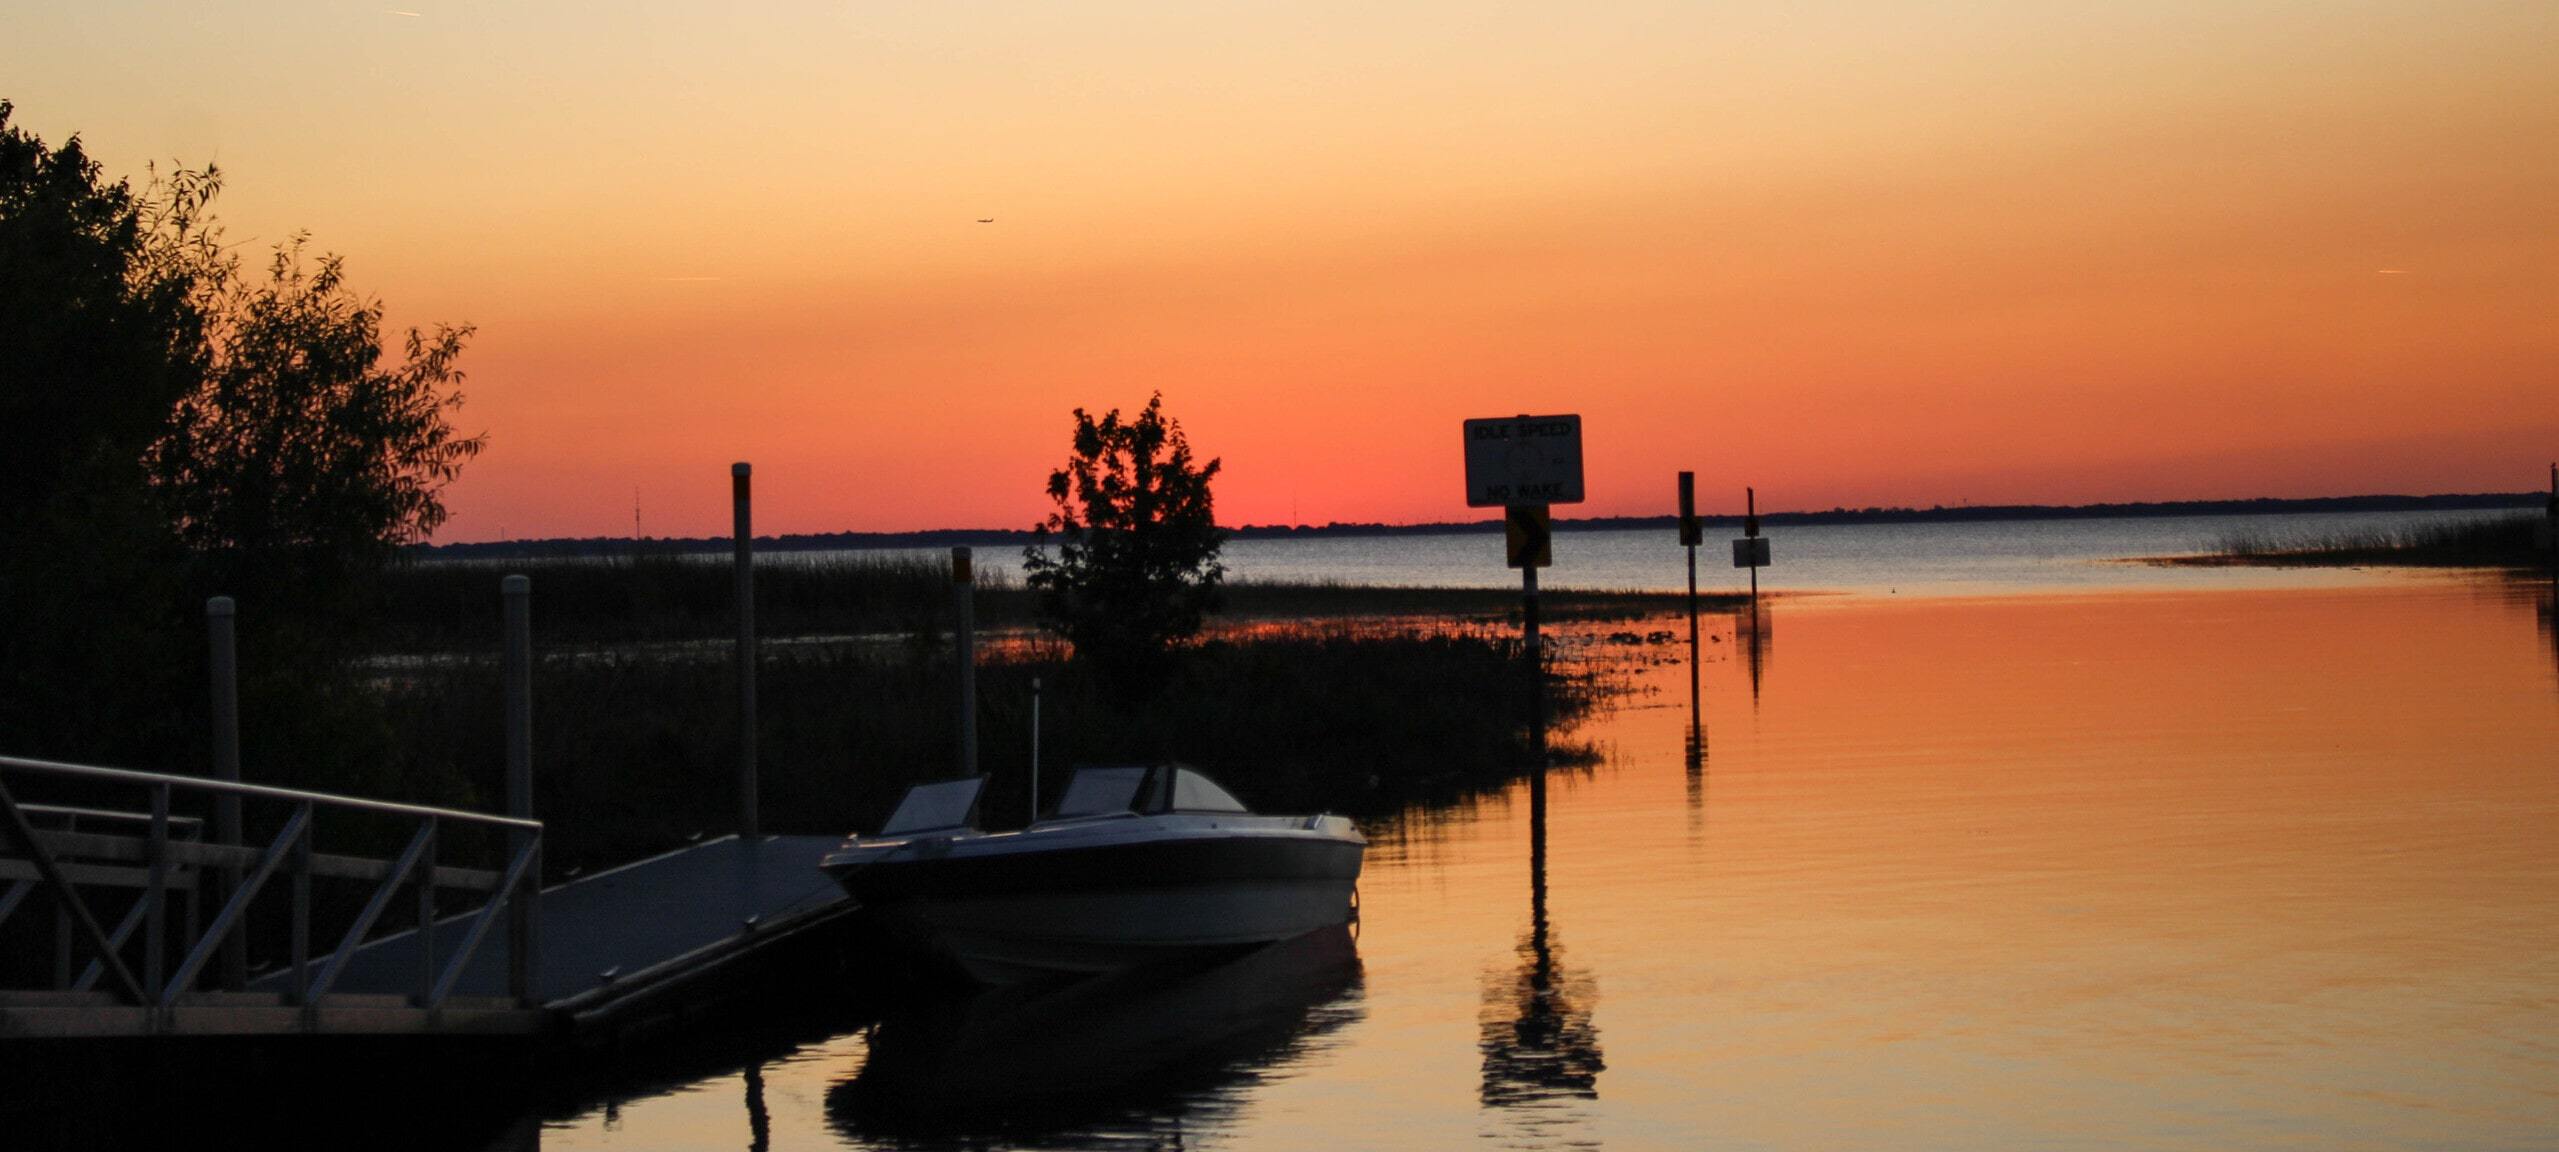 Sunset at waterfront at Chisholm Park Boat Ramp in St. Cloud, FL